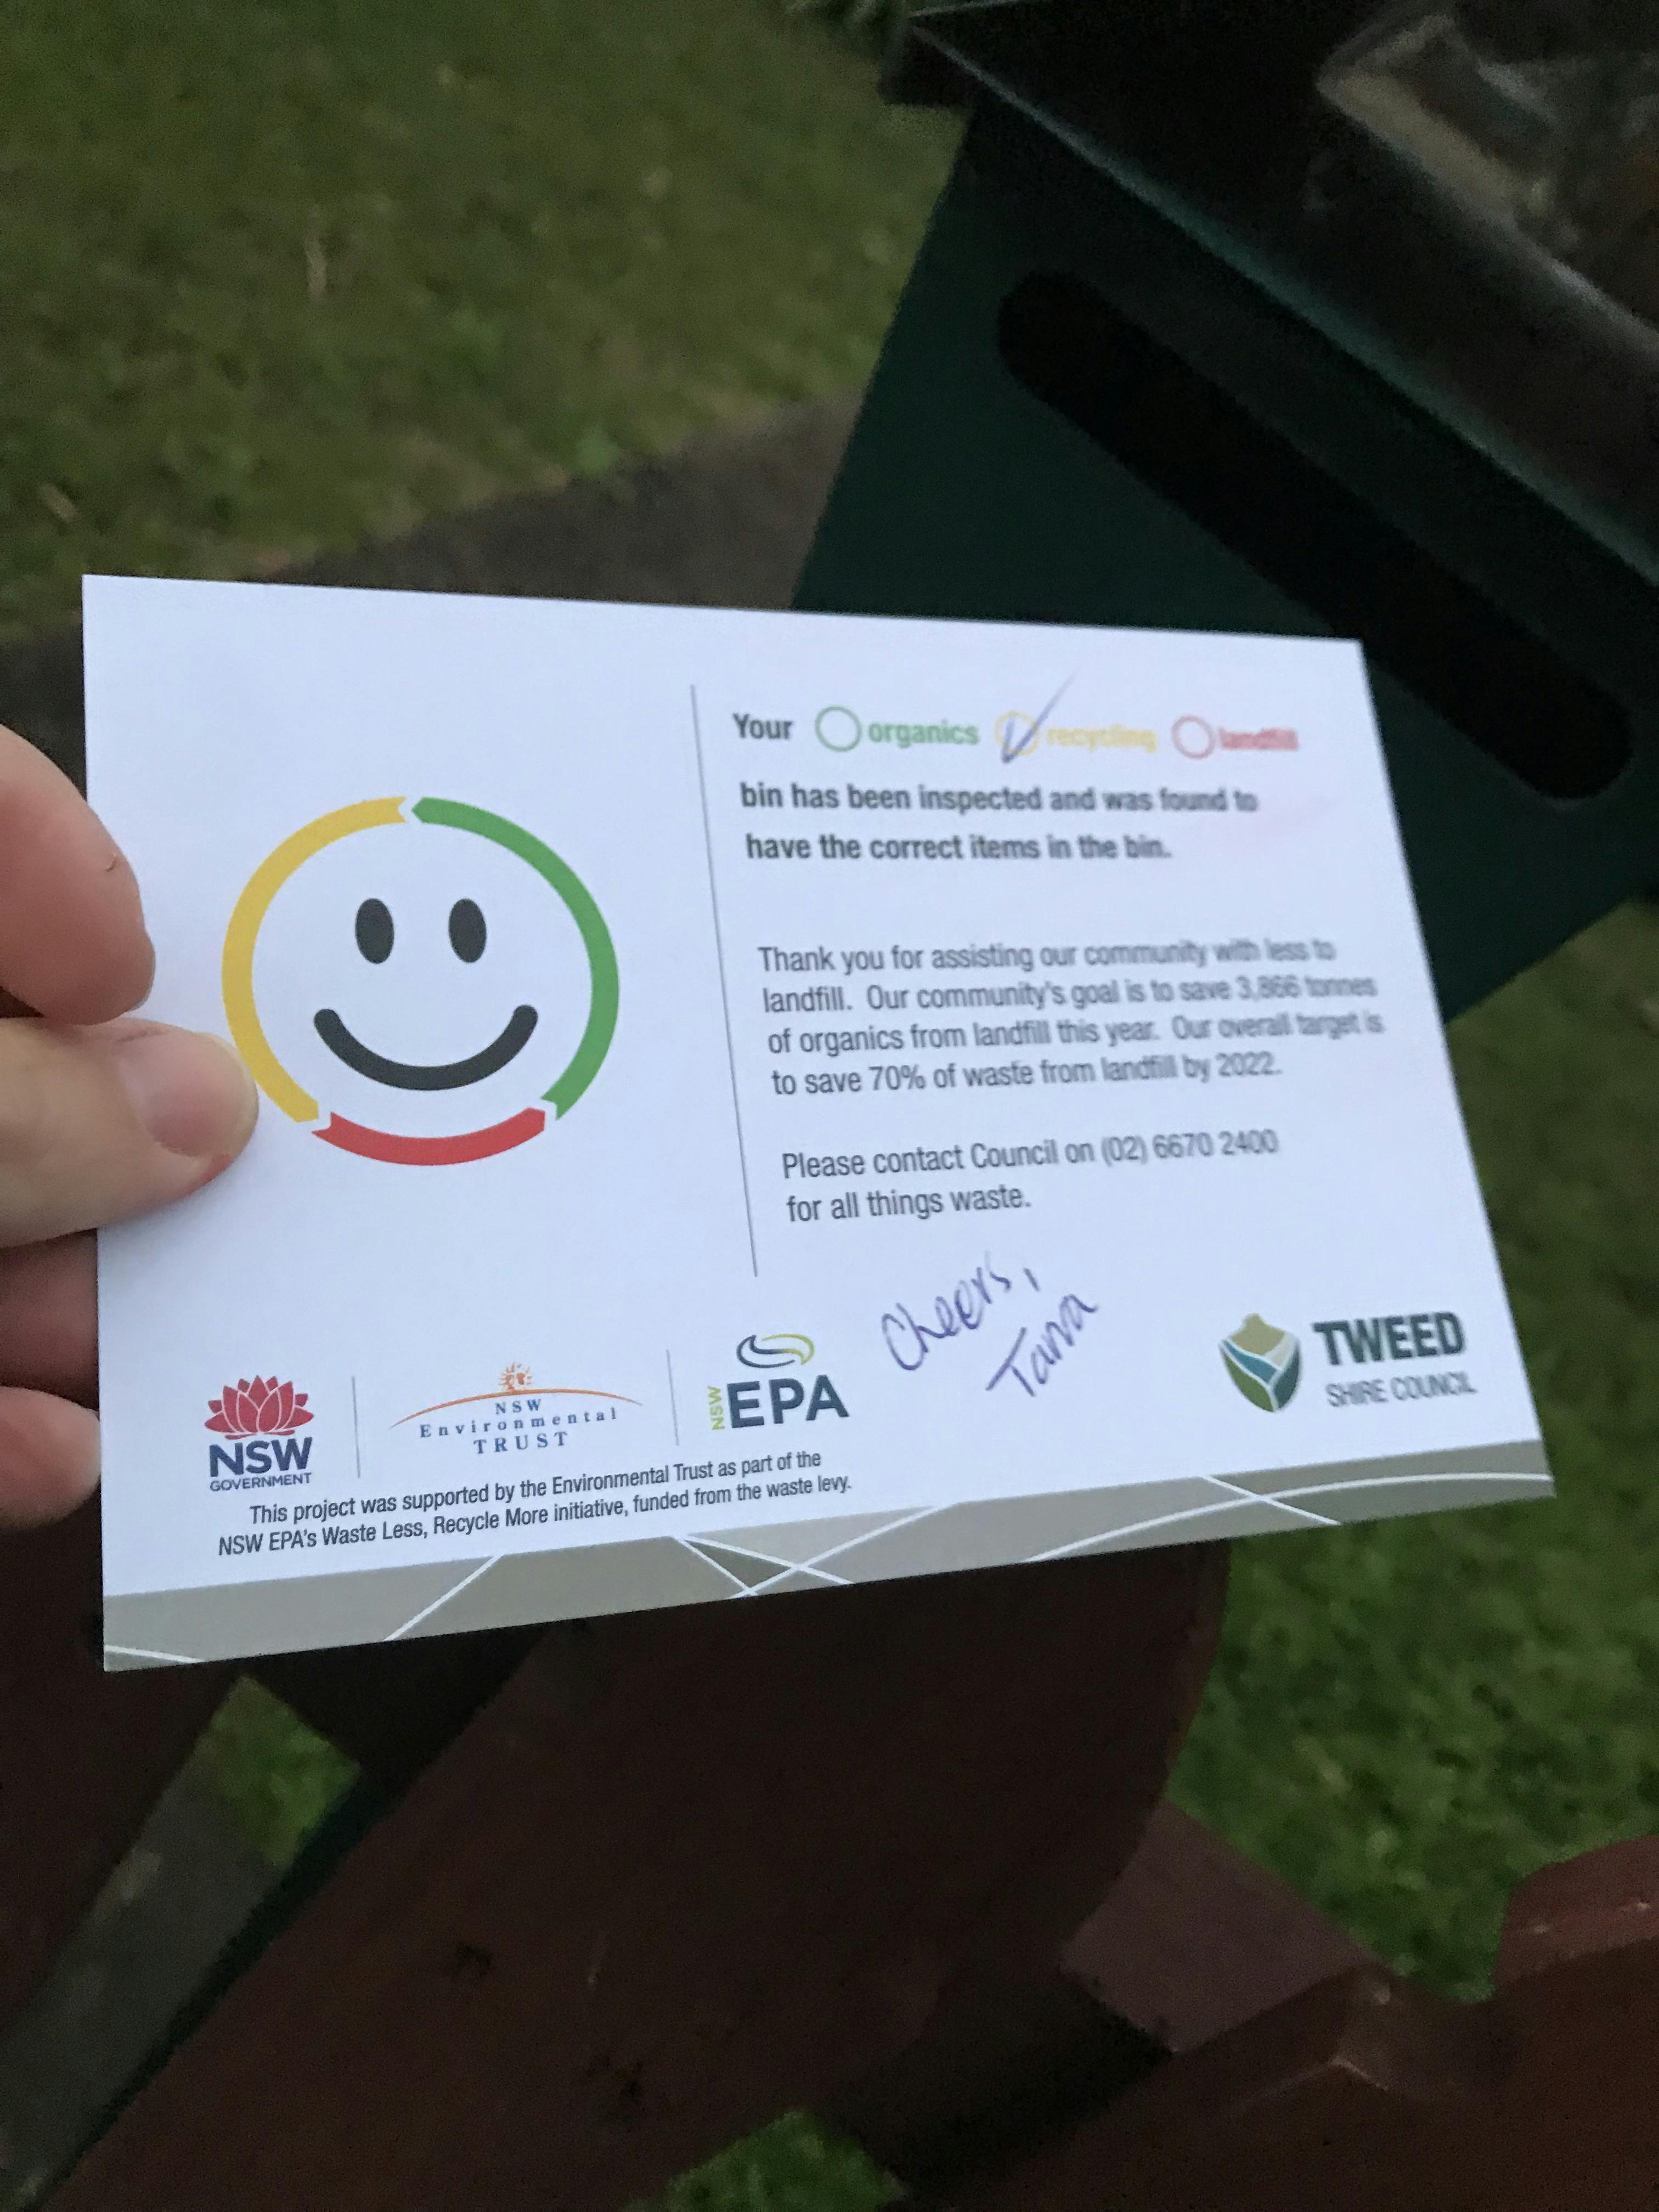 Thank you card left for a resident doing the right thing and sorting their waste correctly into the right bins. This means less waste going to landfill!